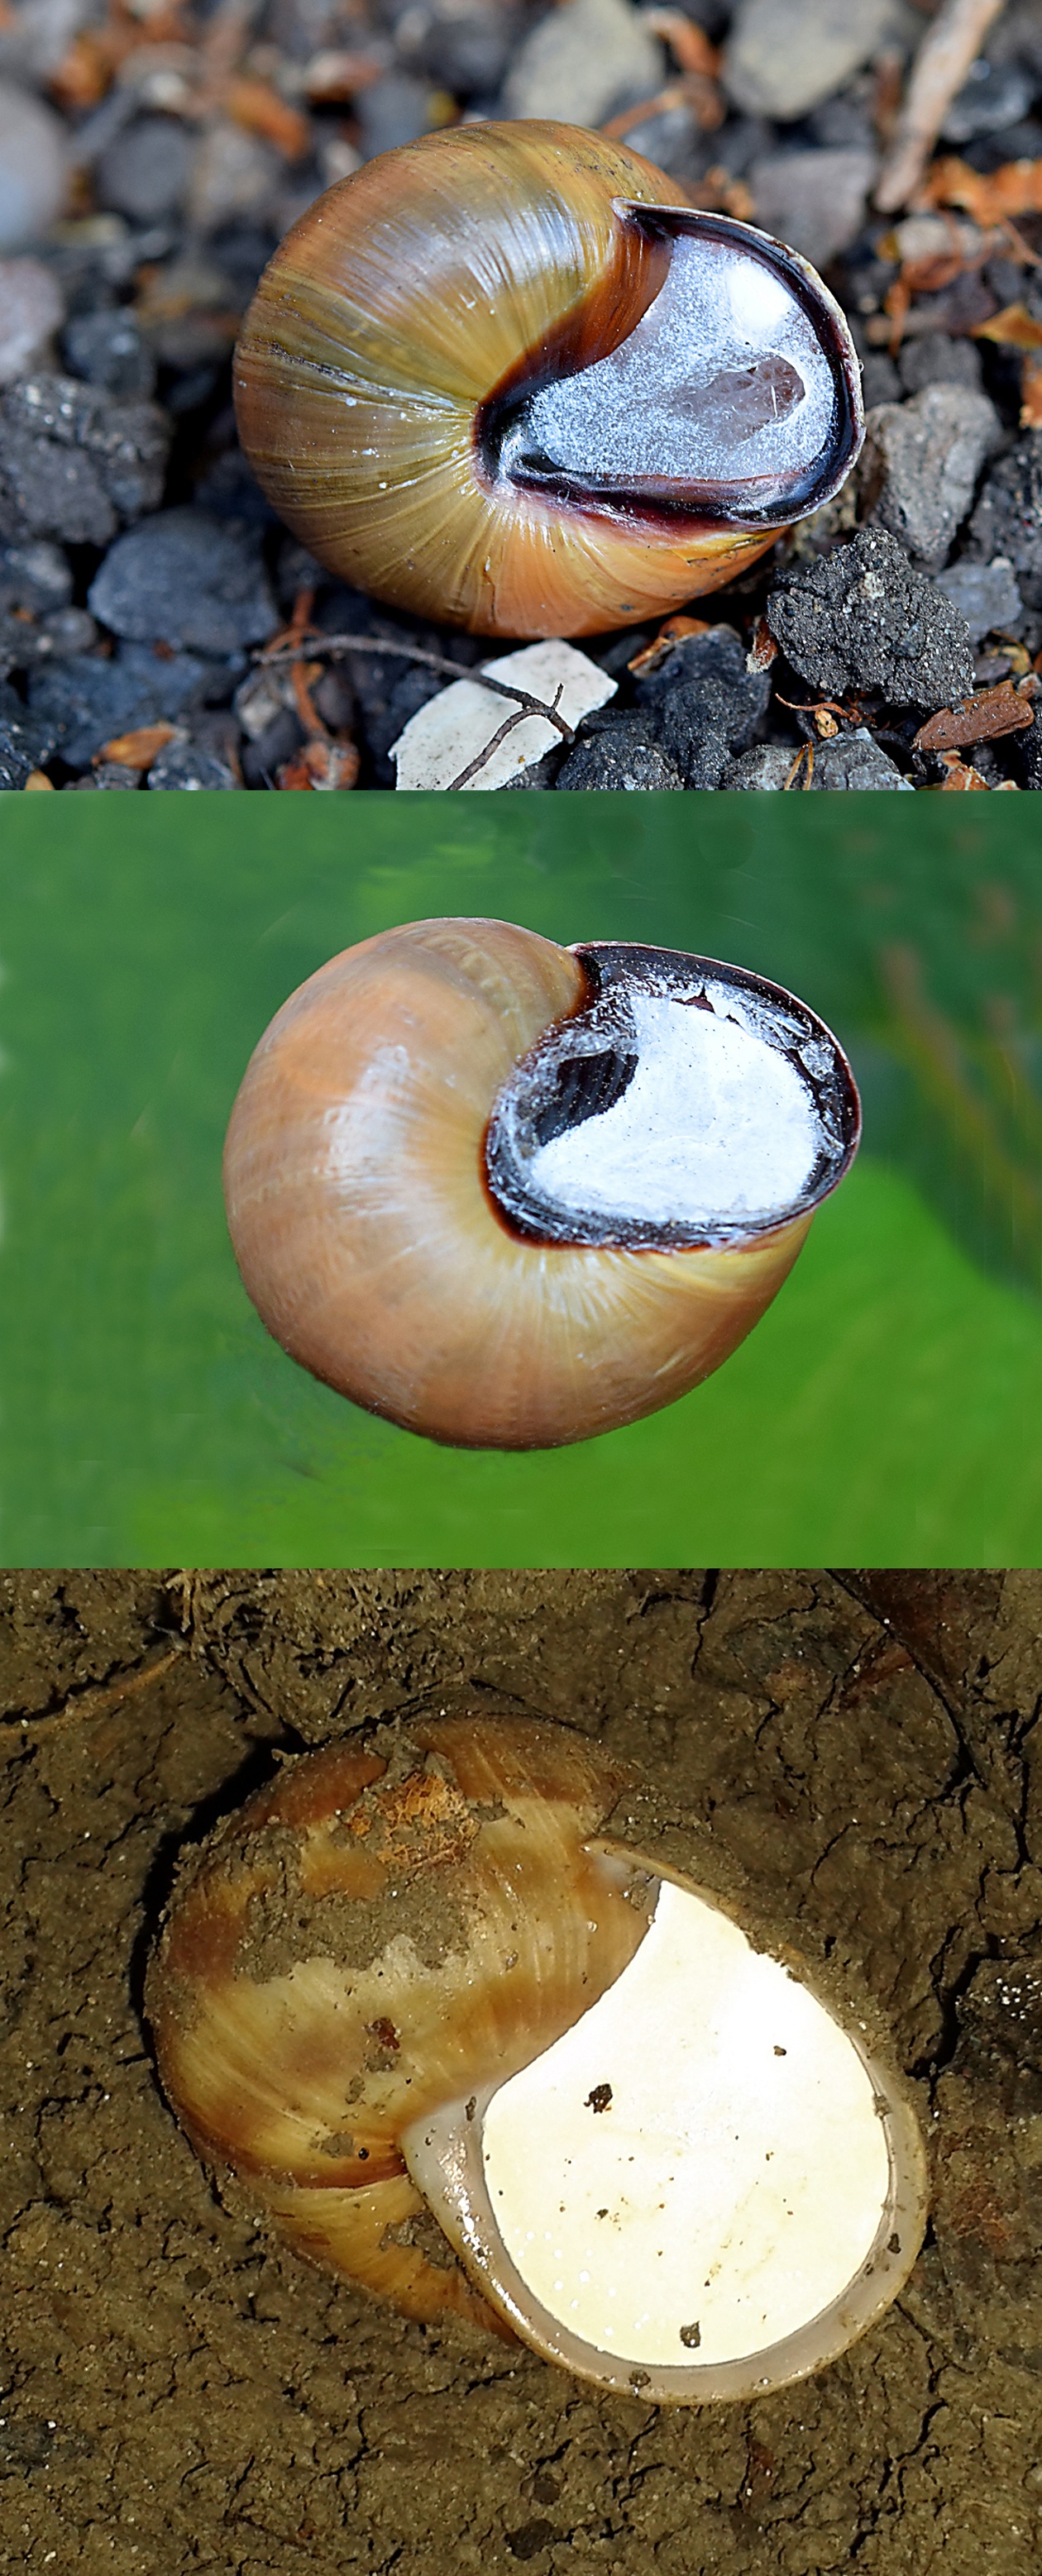 What happens to snails and slugs in winter?